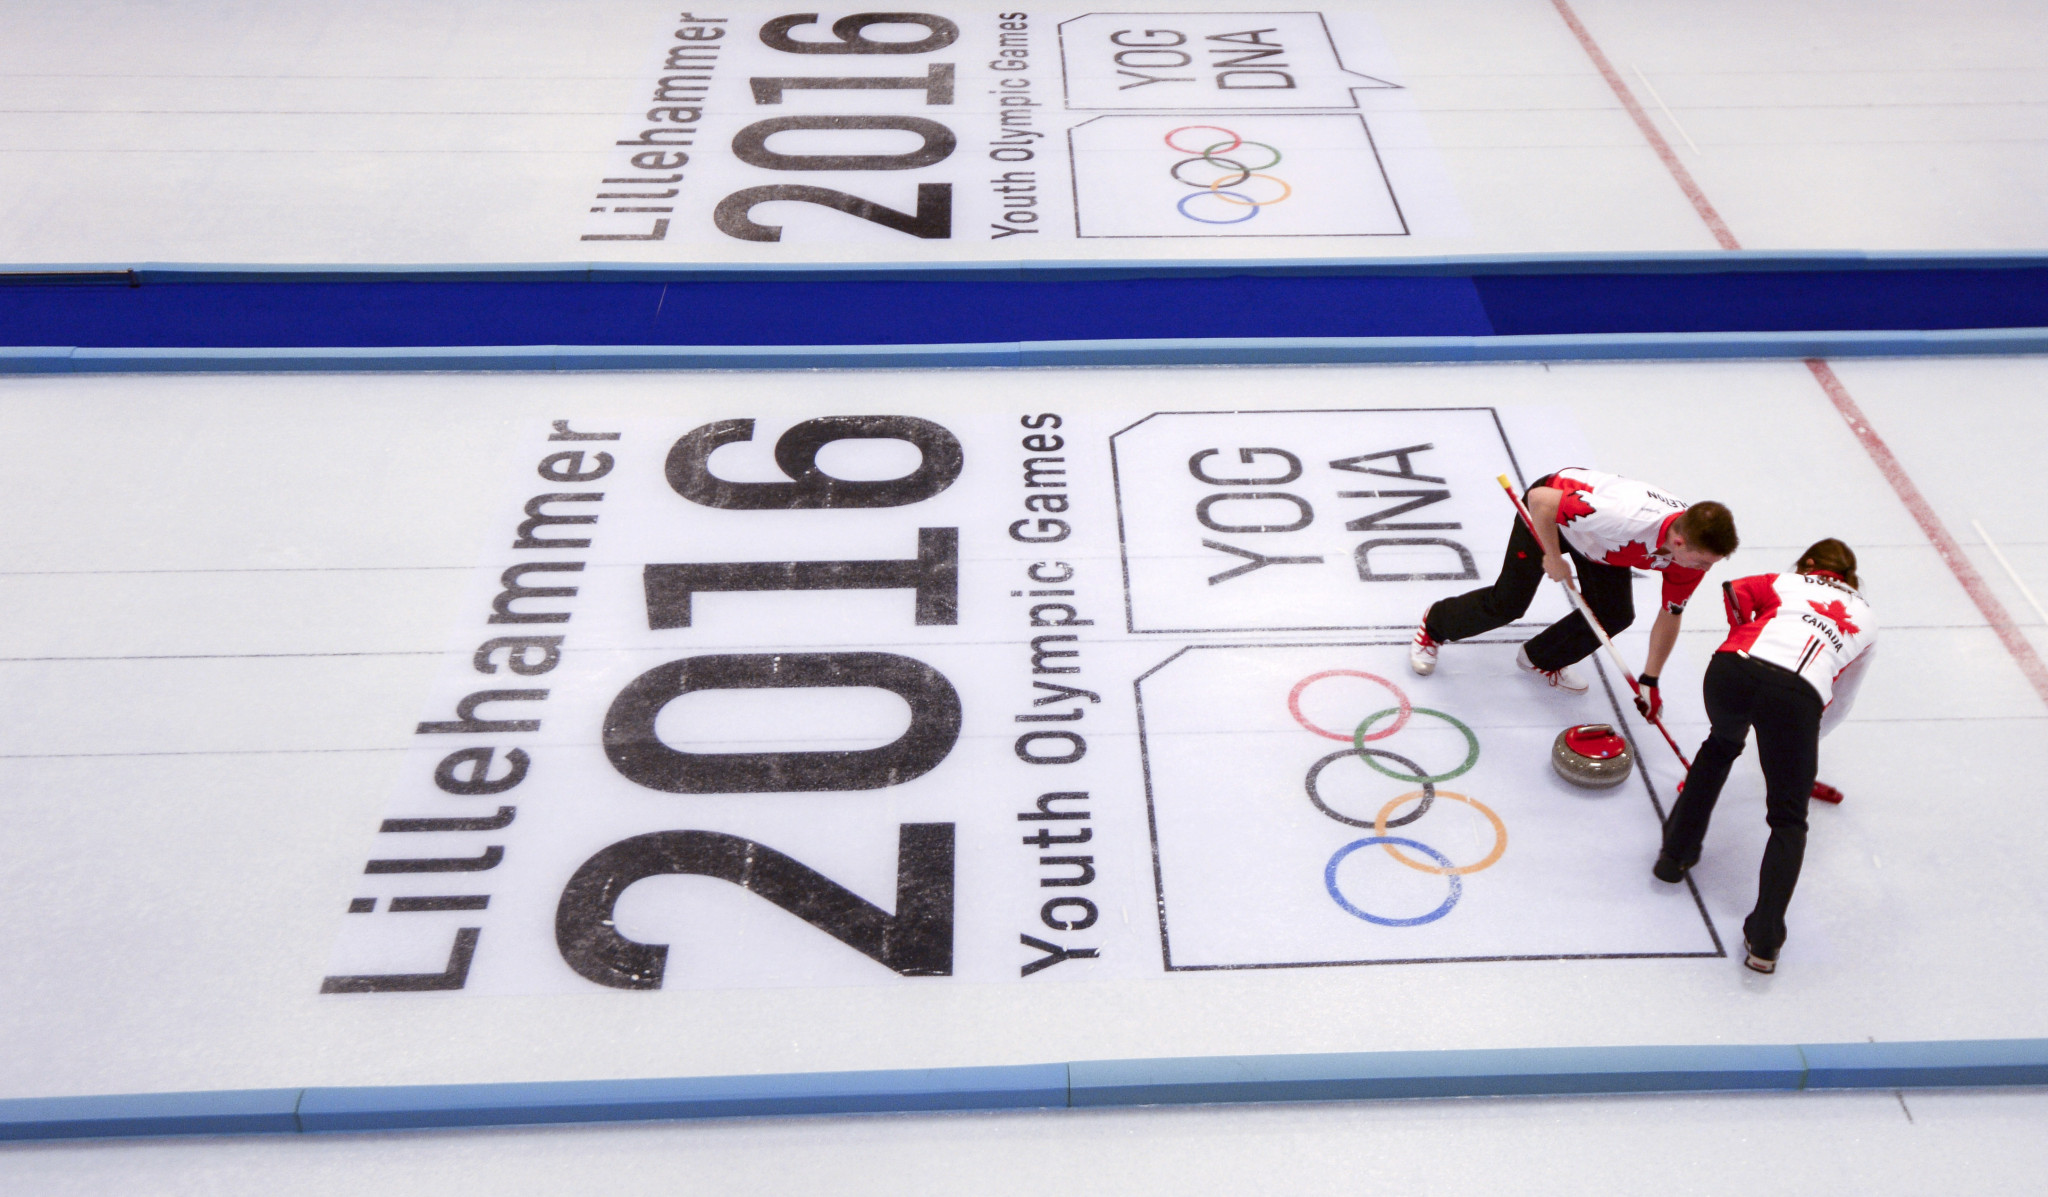 The Kristins Hall hosted the curling events at the 2016 Winter Youth Olympic Games ©Getty Images